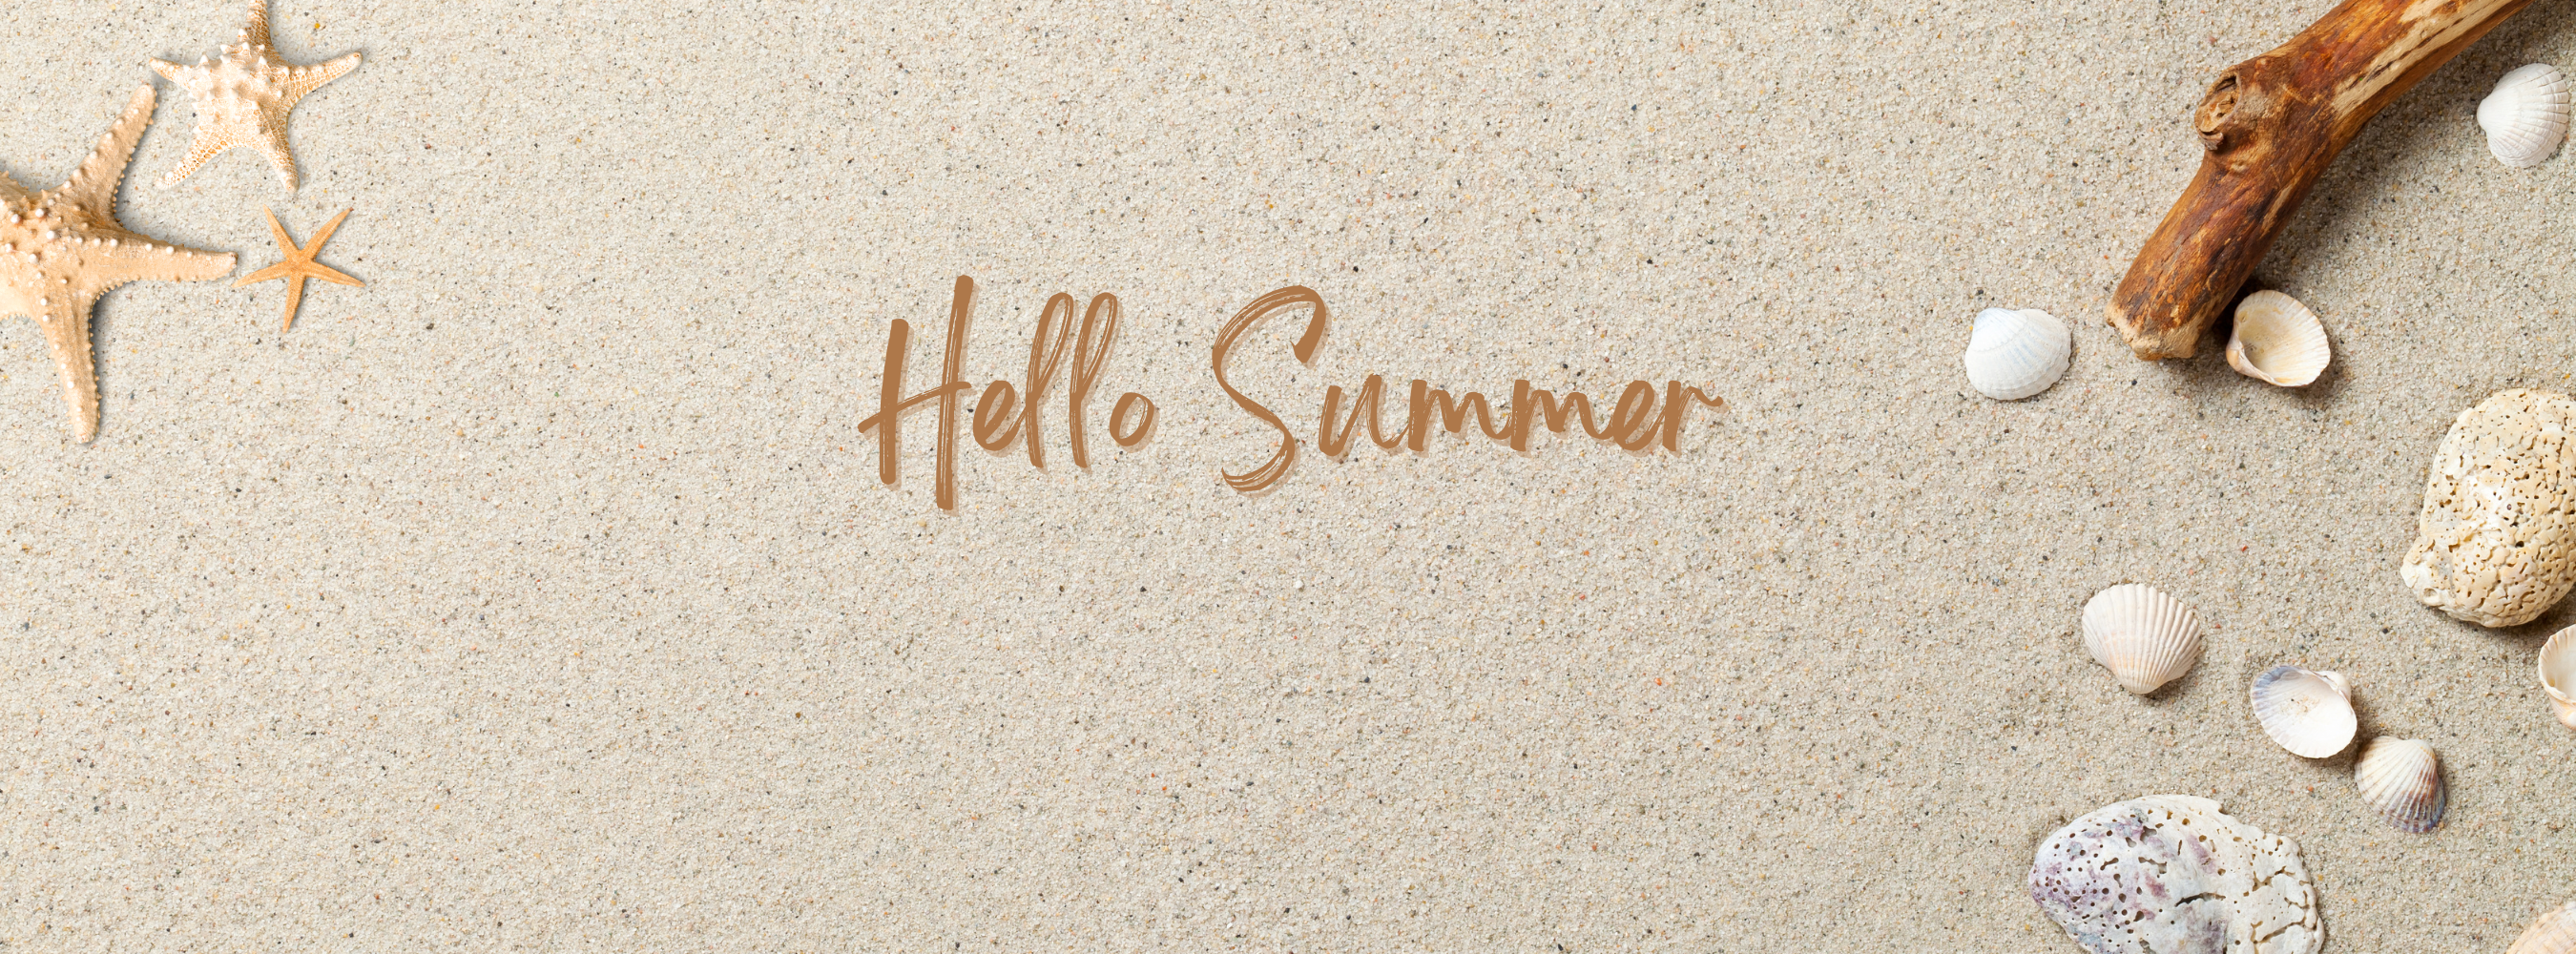 Sand and seashells with text that introduces summer.